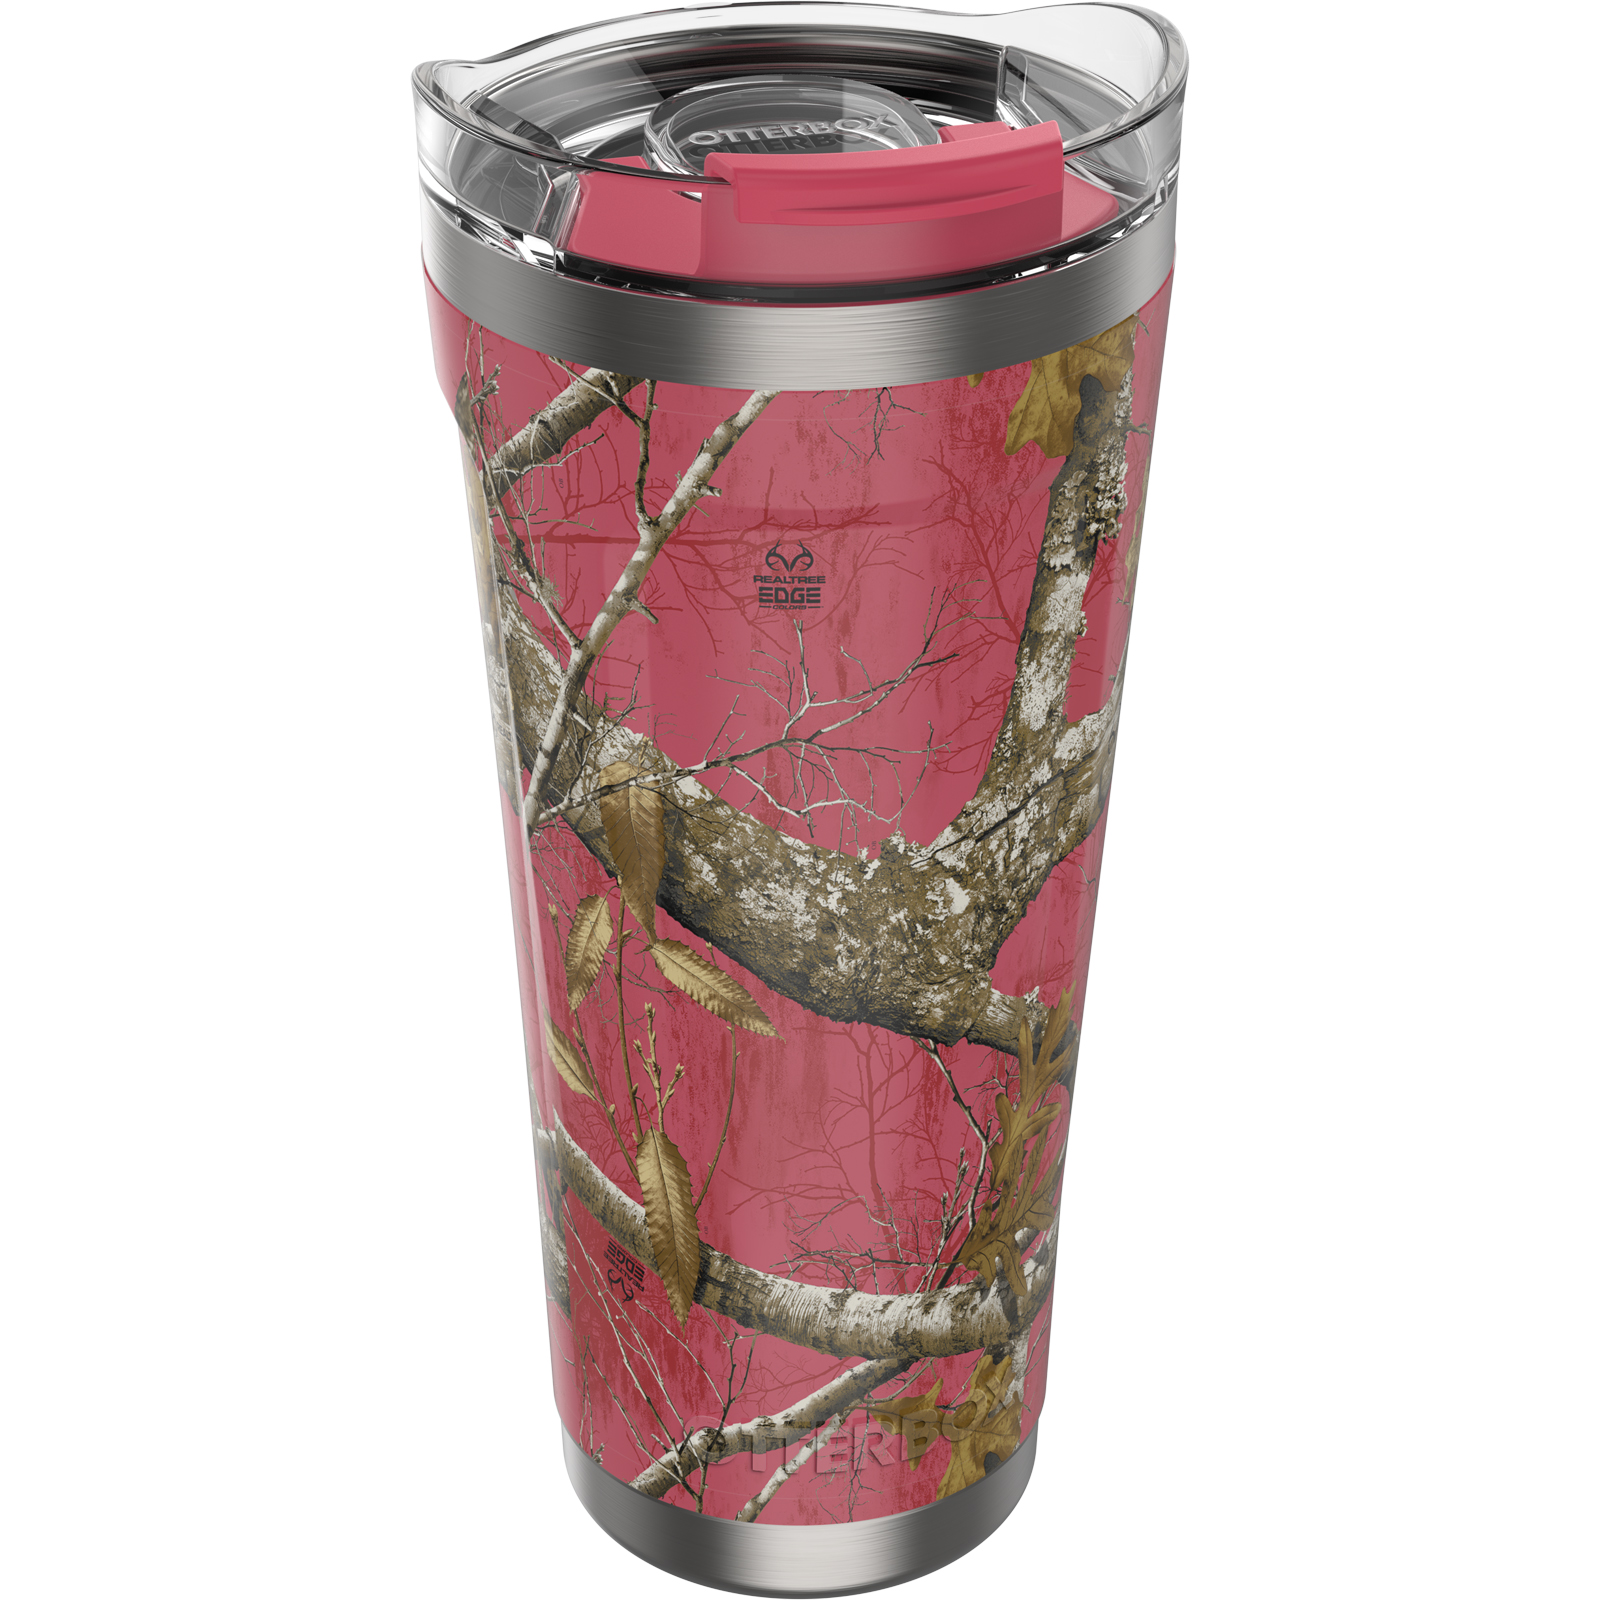 Yeti Just Dropped an All-New Camo Tumbler, and You Don't Want to